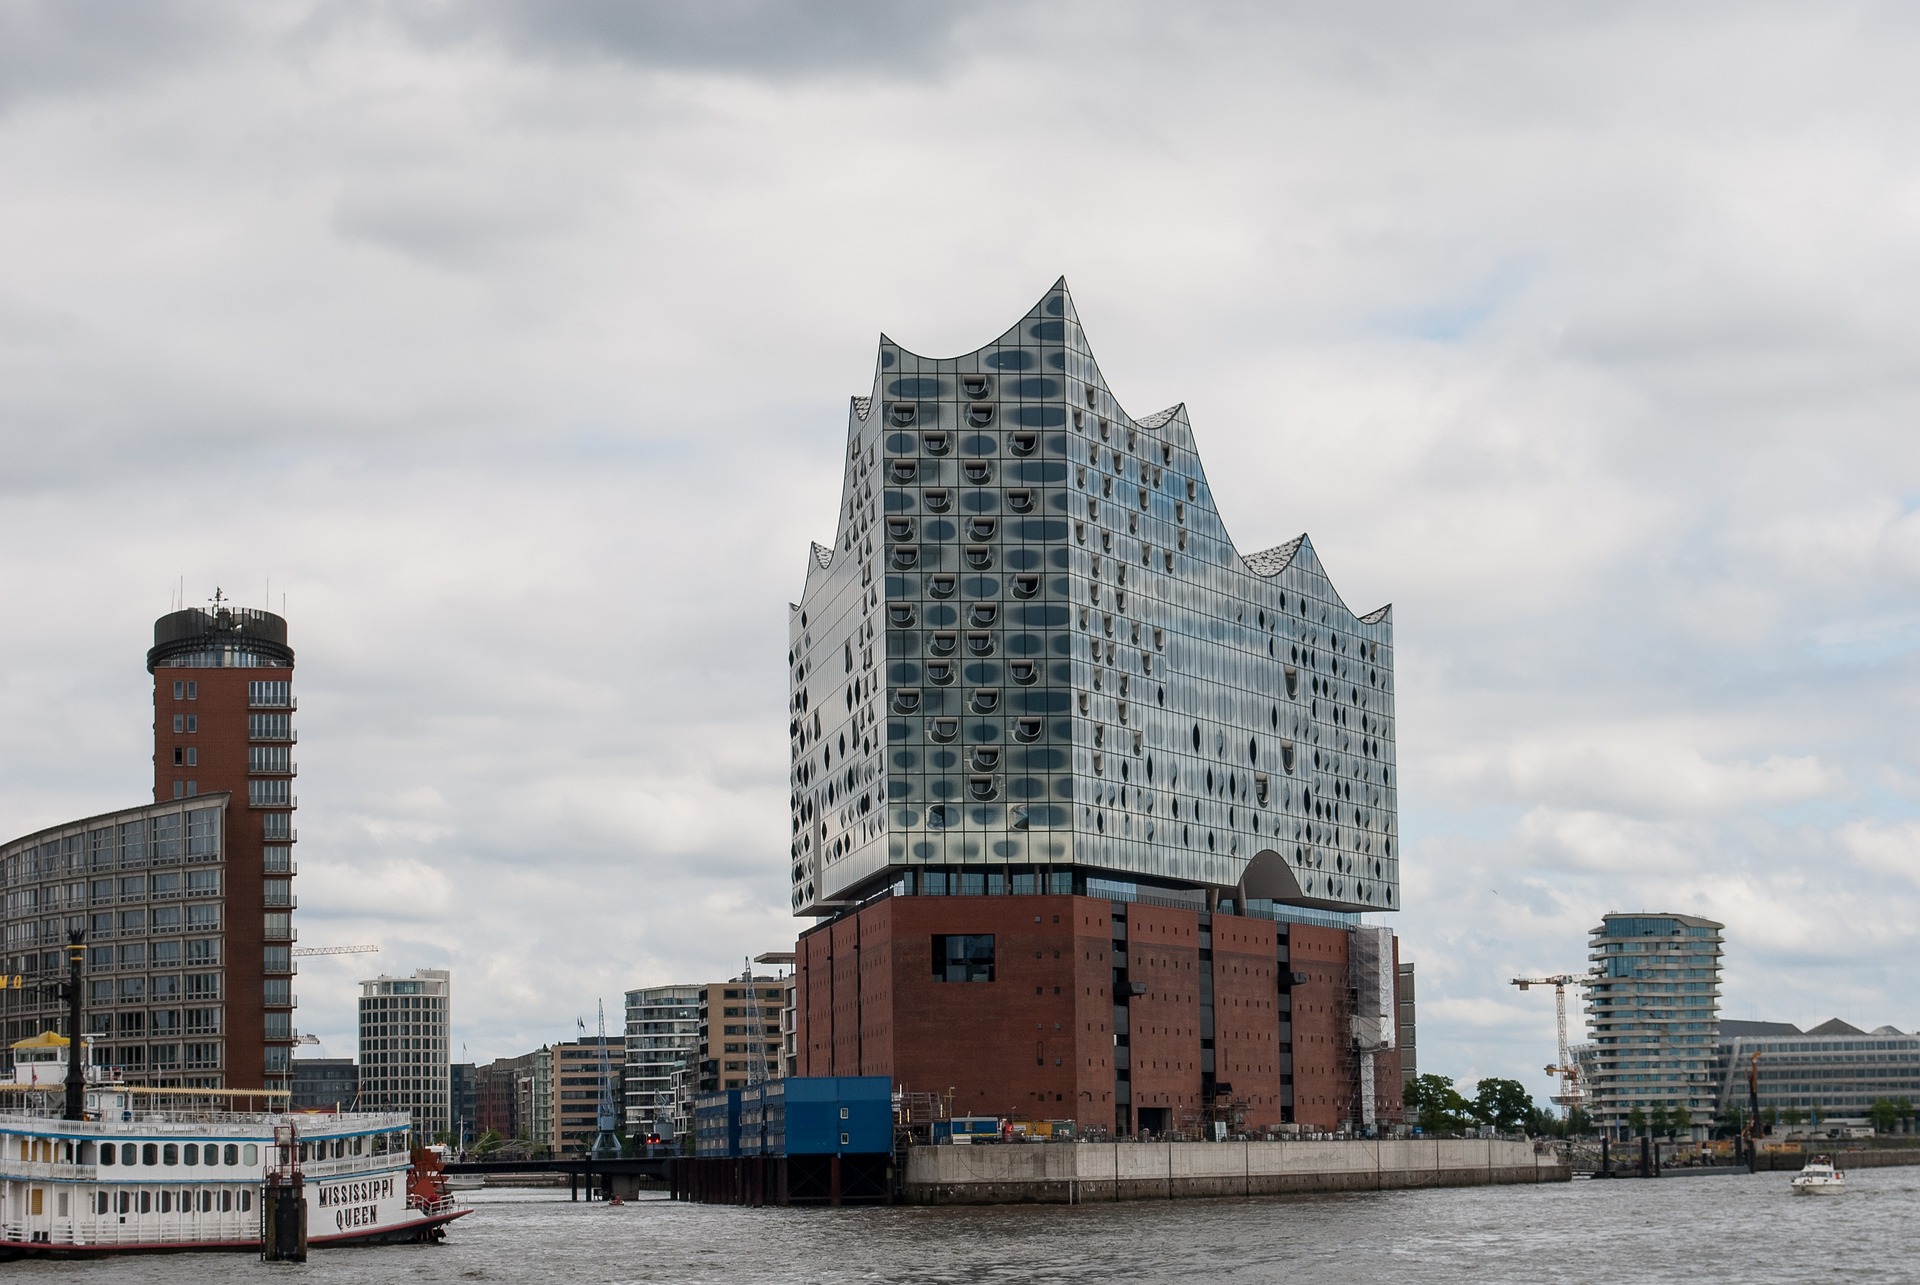 Tradition meets modernity: The Elbphilharmonie Hamburg, affectionately known as Elphi.